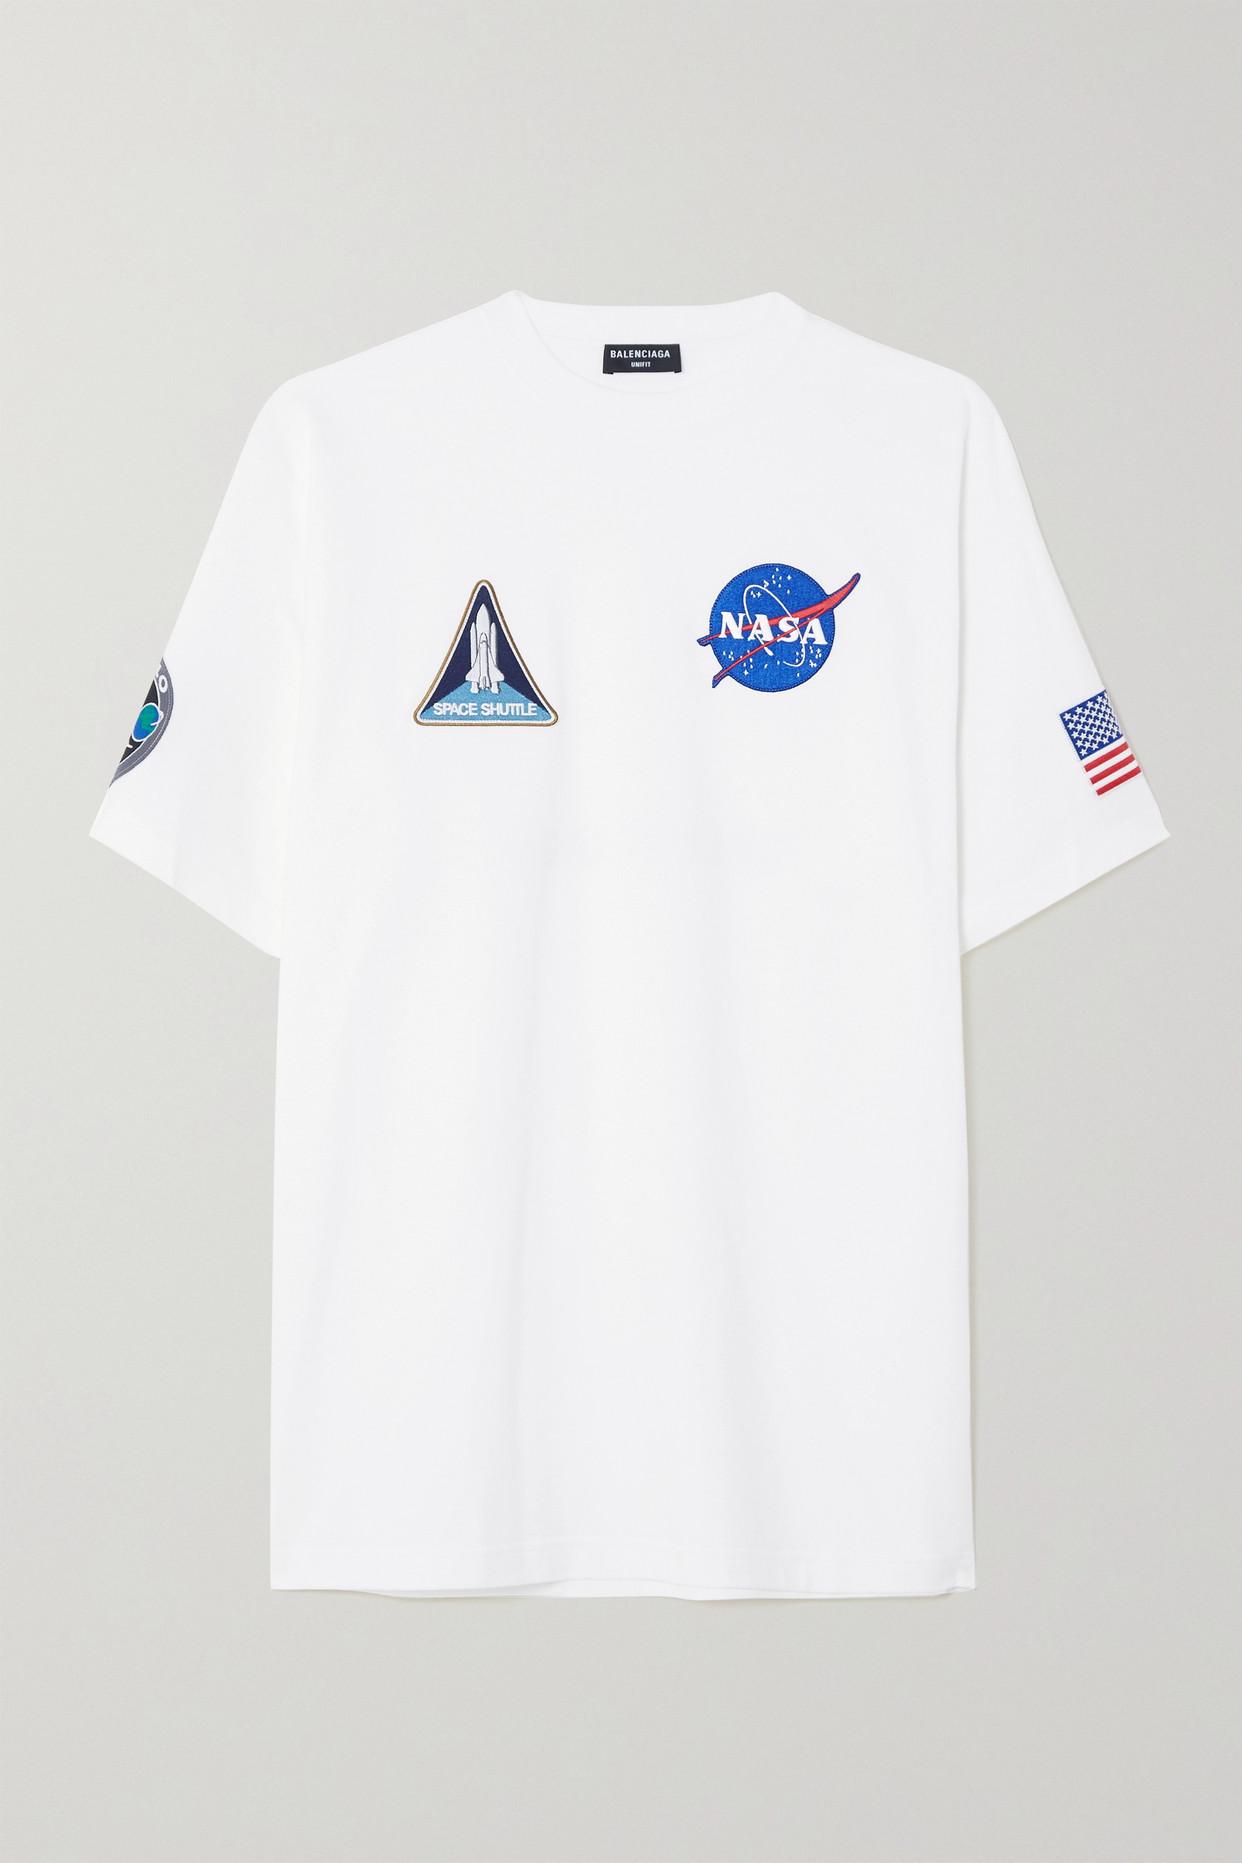 Balenciaga Synthetic Nasa Space Oversized Appliquéd Printed Cotton-jersey T- shirt in White | Lyst Canada